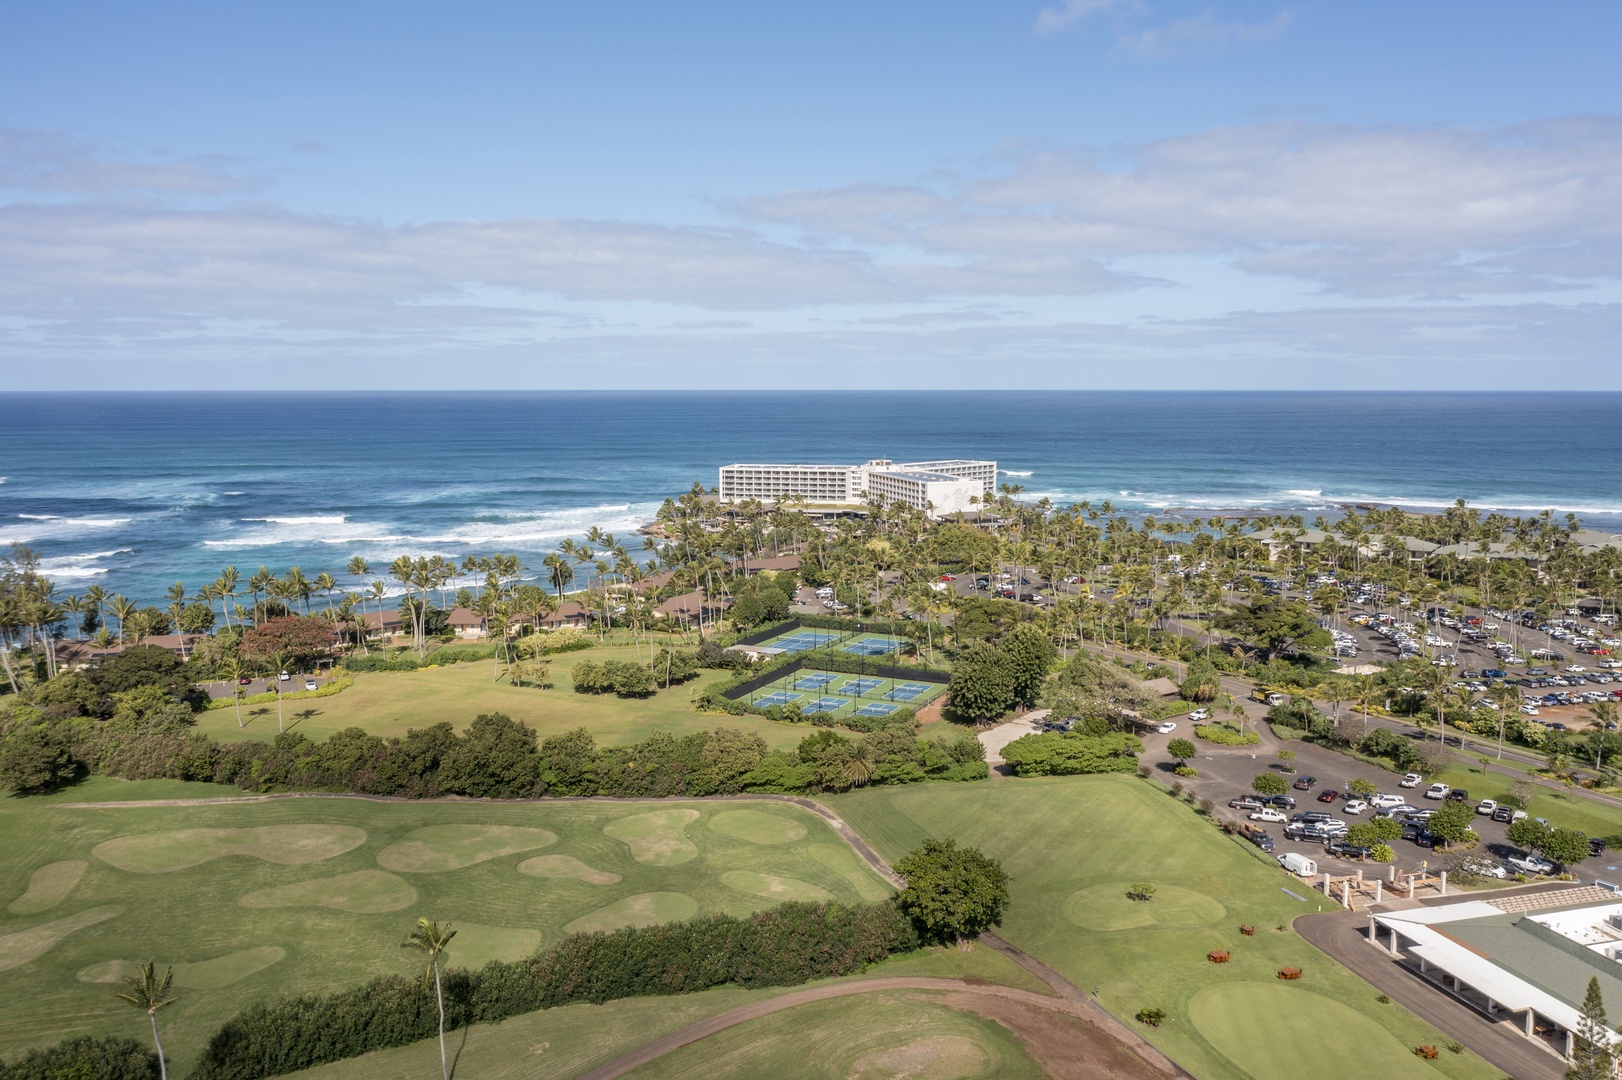 Kahuku Vacation Rentals, Pulelehua Kuilima Estates West #142 - Aerial view of the Turtle Bay Resort, Kuilima Condos are adjacent to the resort golf course